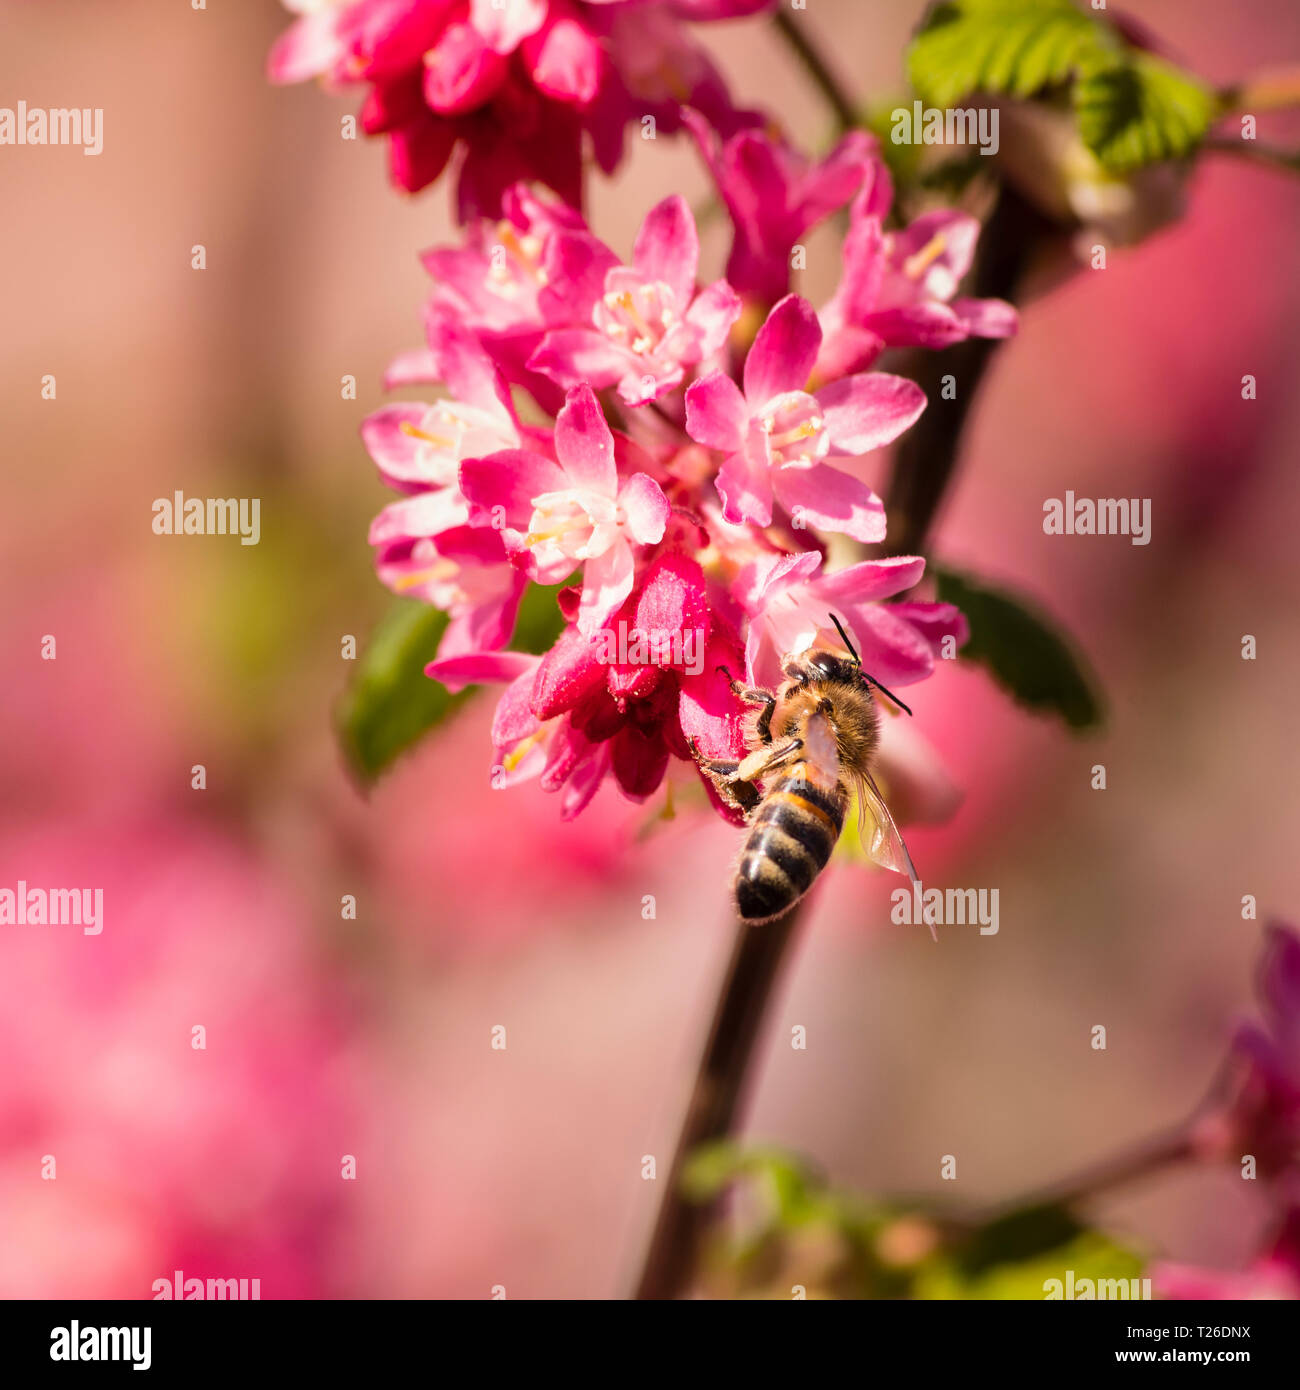 A honey bee feeding on a pink flowering currant plant. Stock Photo